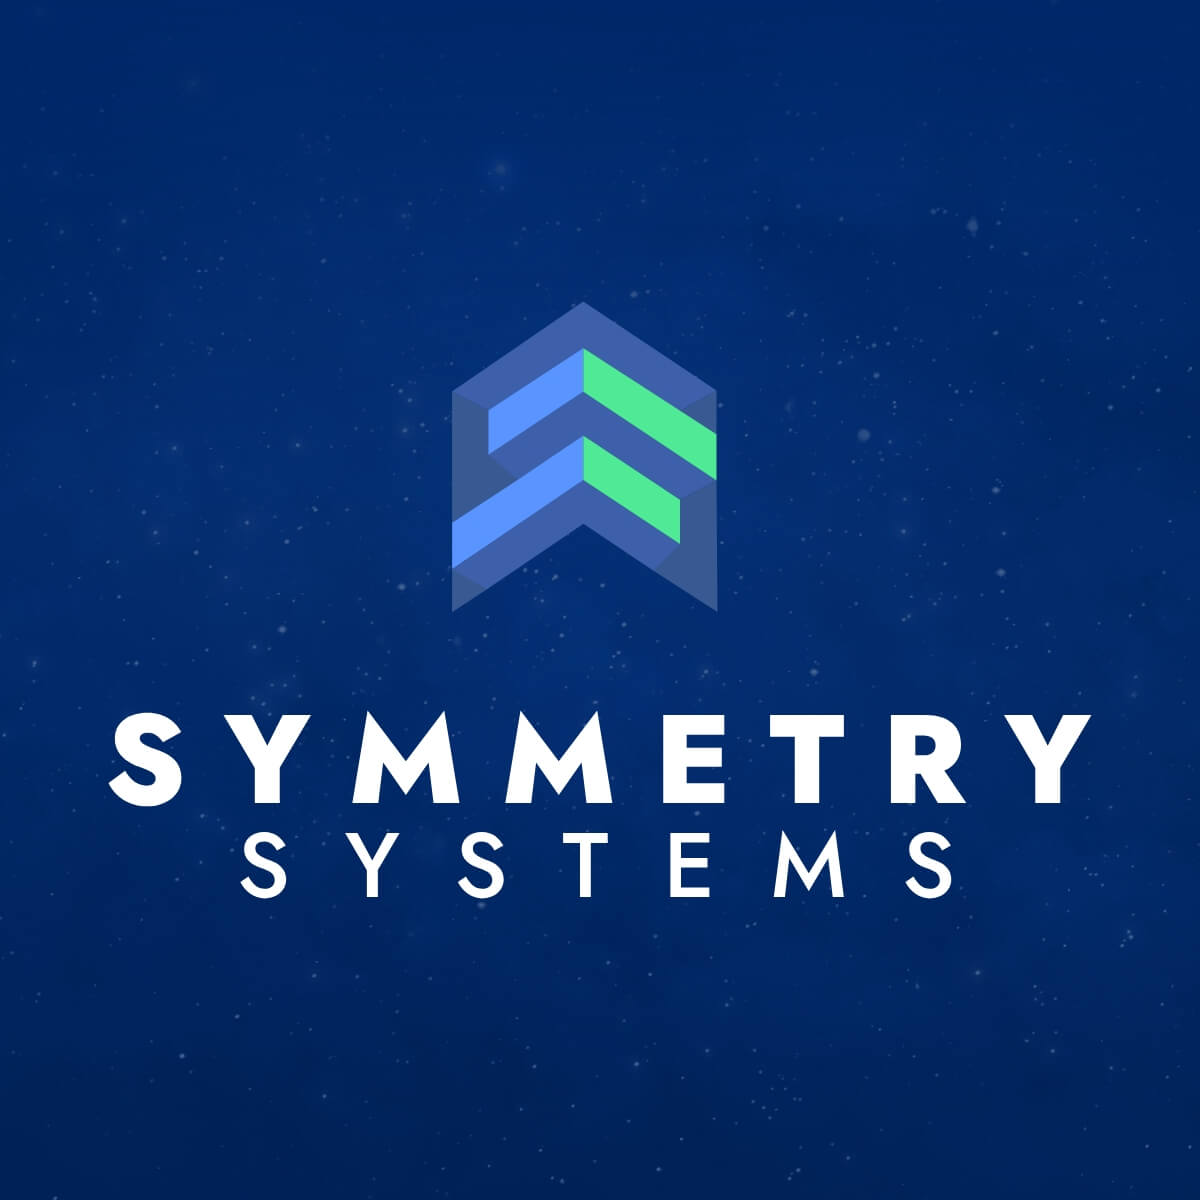 symmetry-systems-emerges-from-stealth-with-3-million-in-seed-funding-from-forgepoint-capital-and-prefix-capital-to-transform-data-security